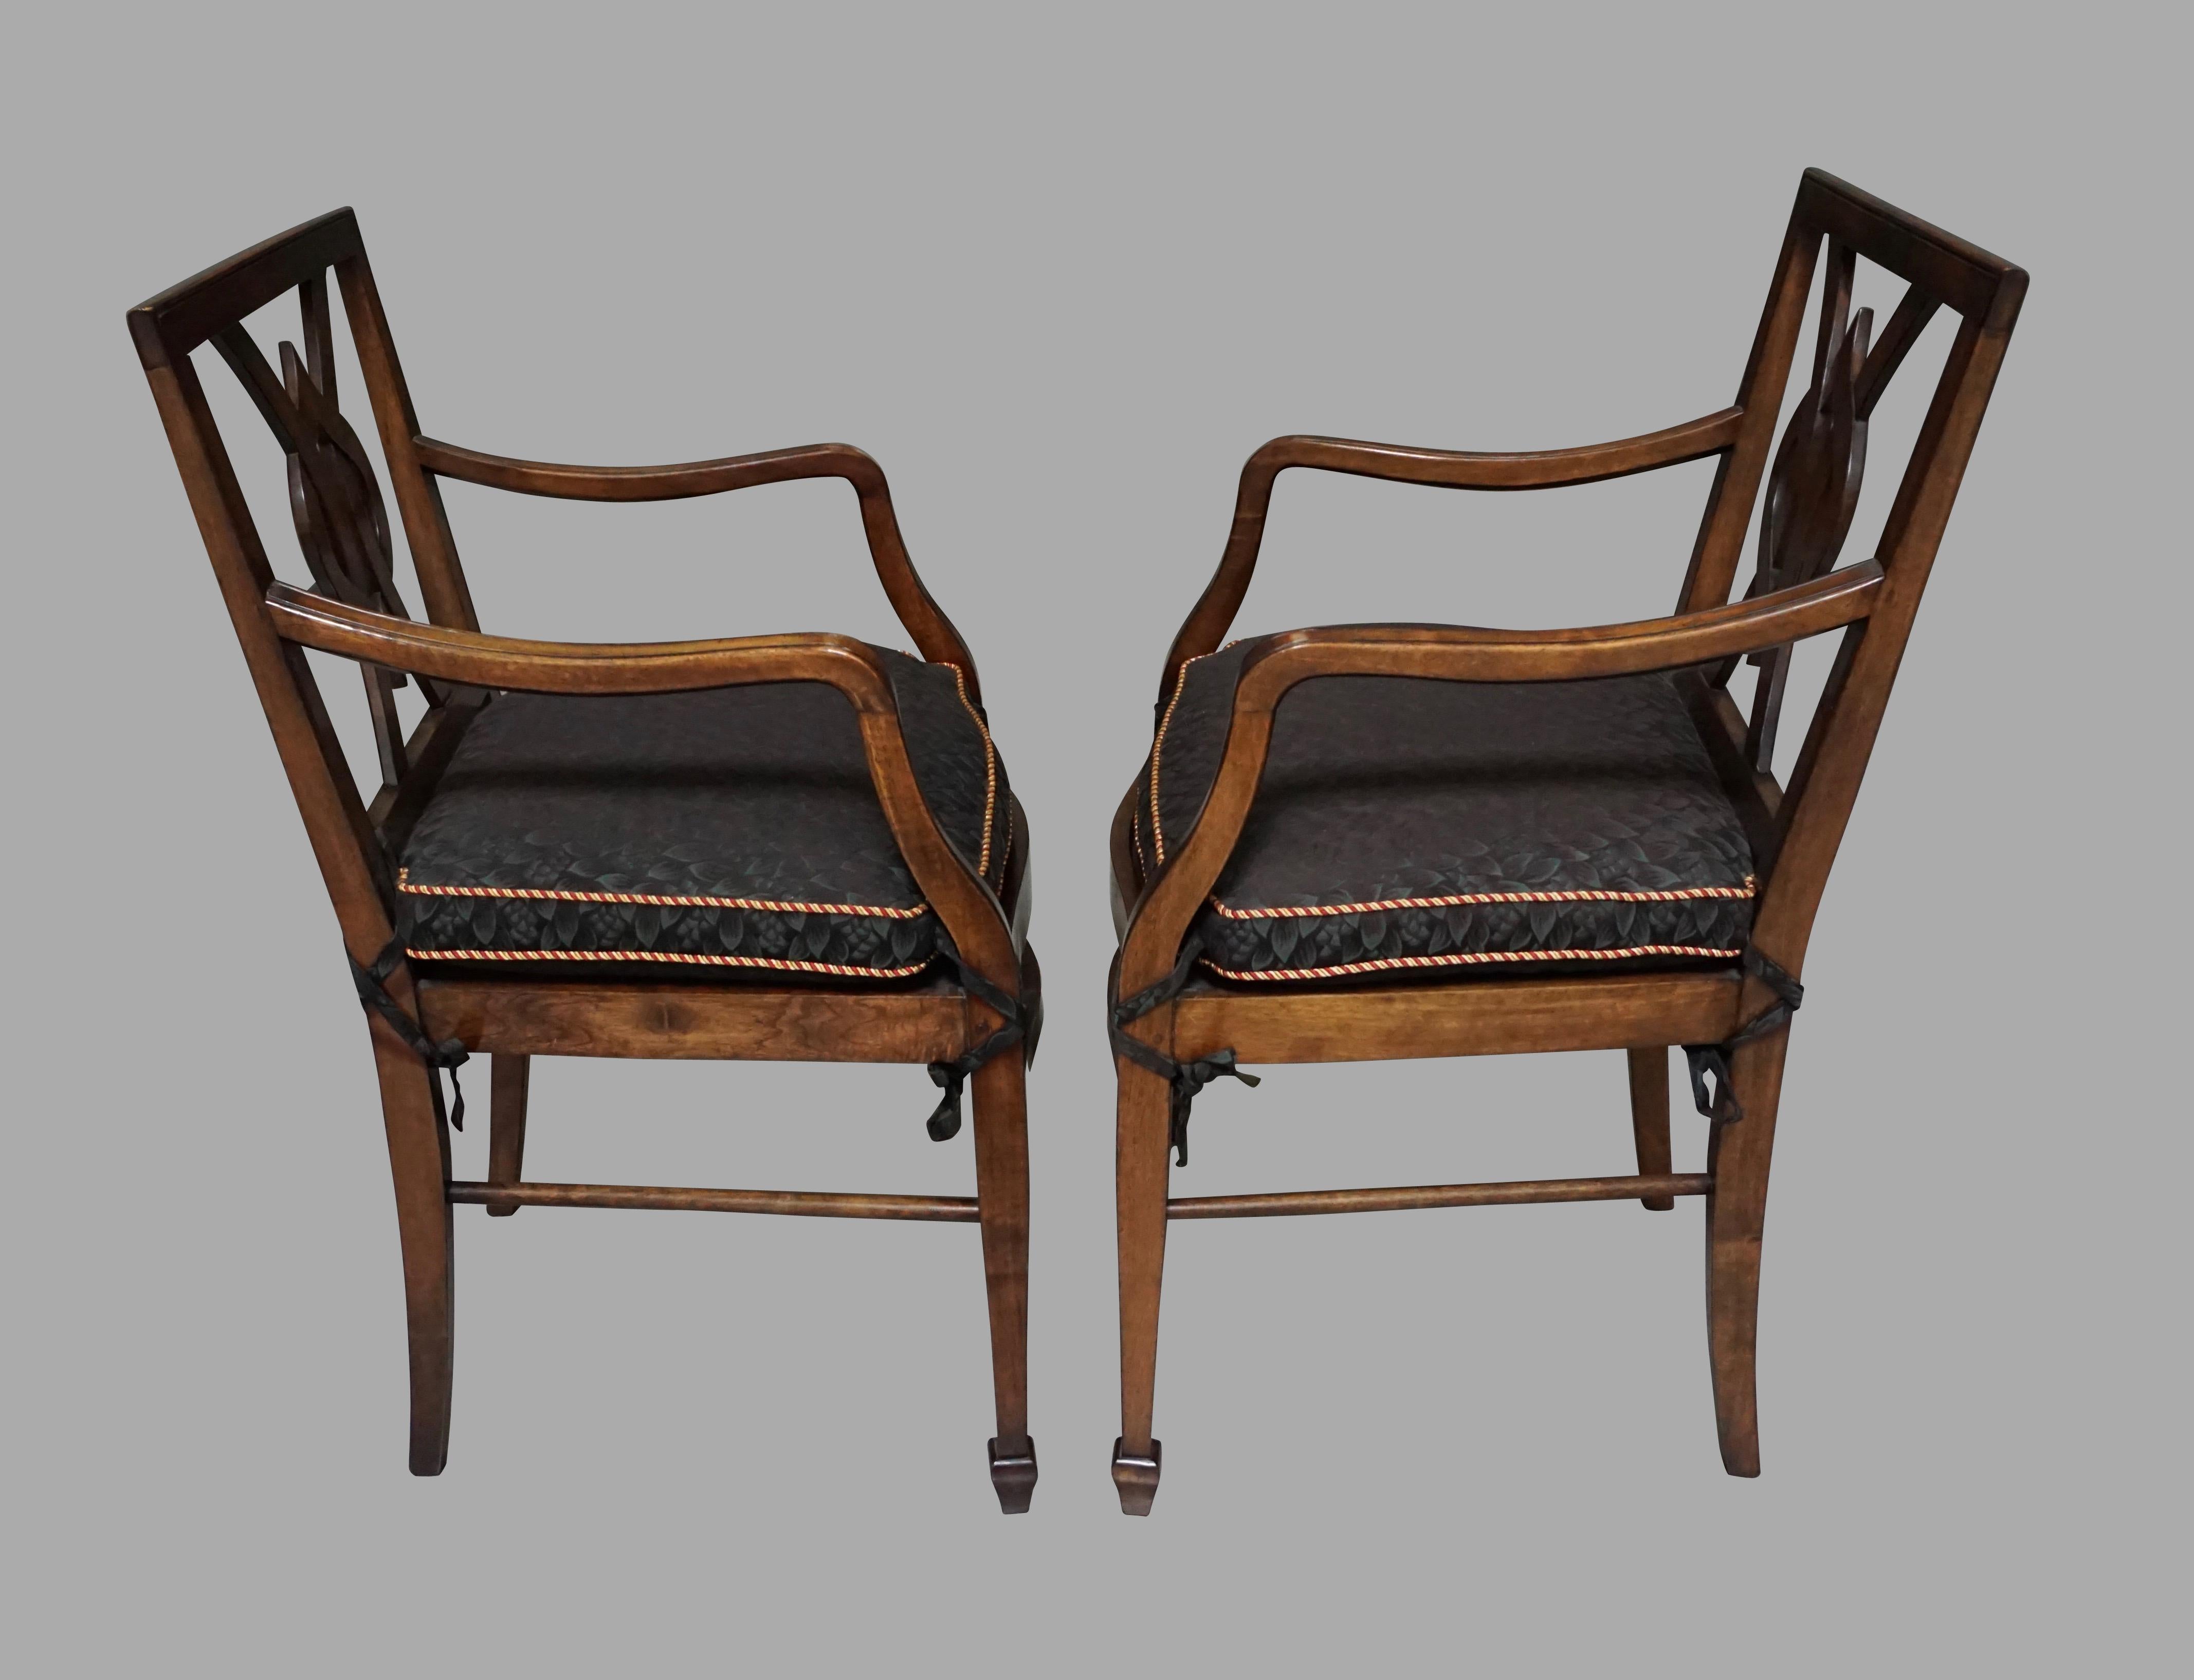 American Set of 12 Mahogany Dining Chairs in the Neoclassical Taste